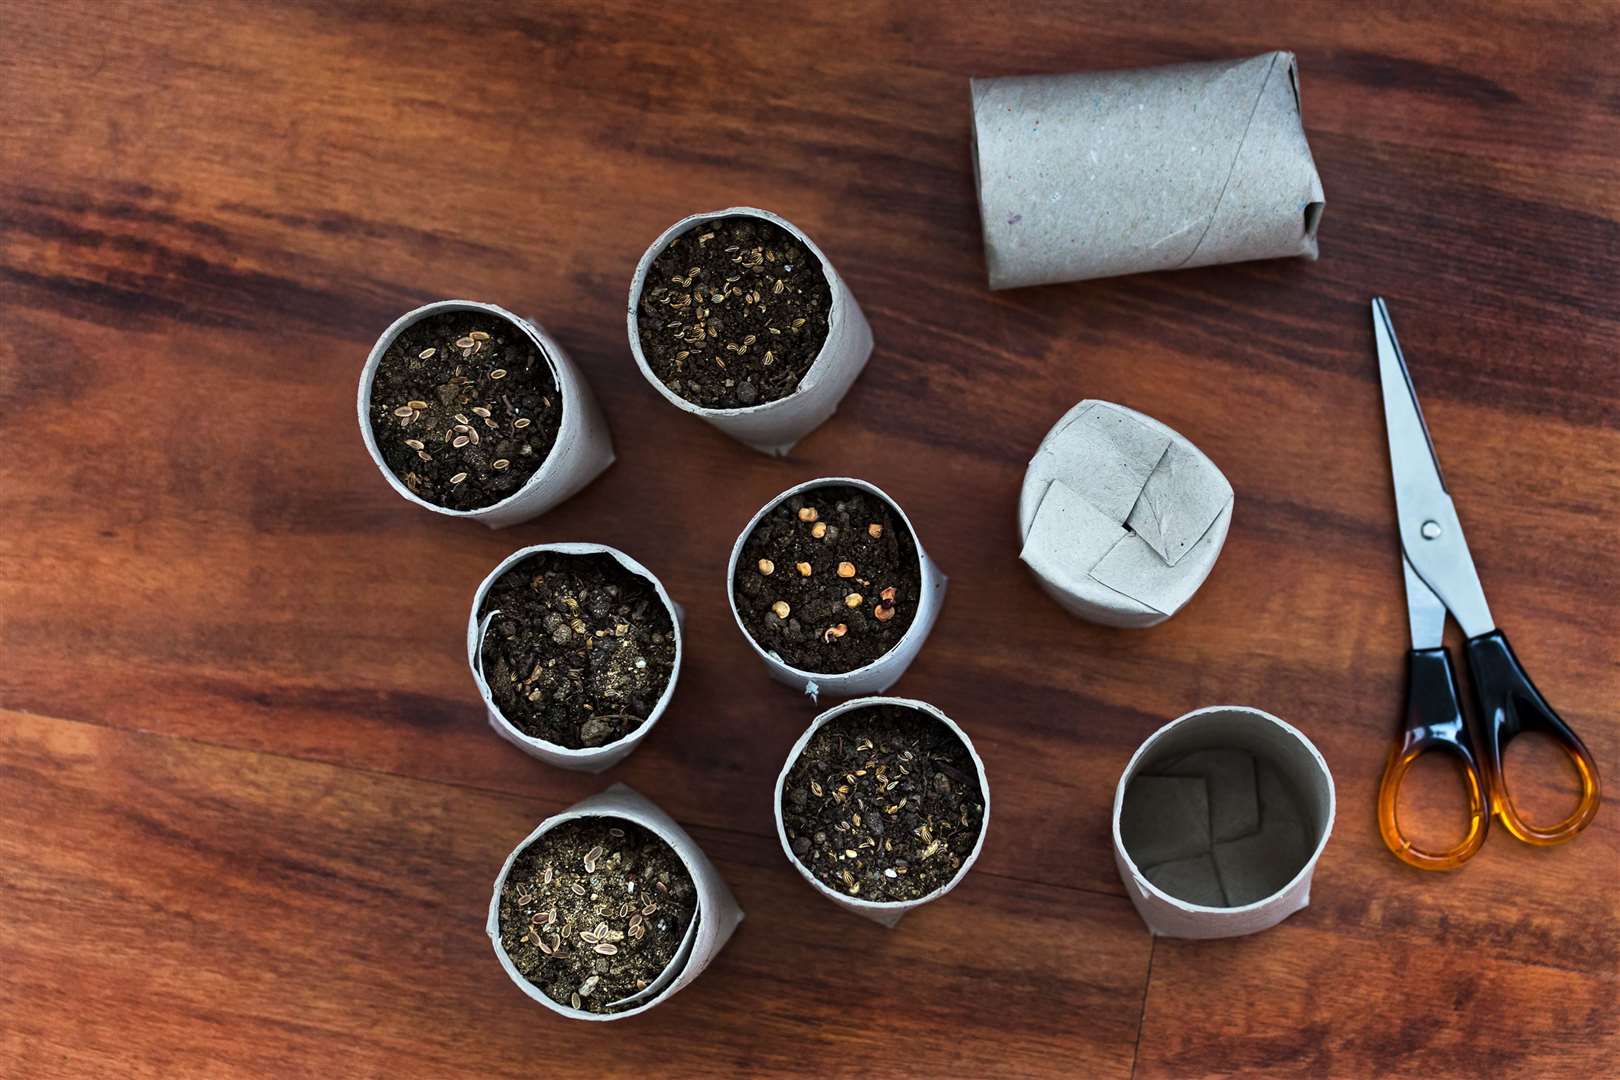 Make use of toilet roll tubes to make seed pots. Picture: iStock/PA